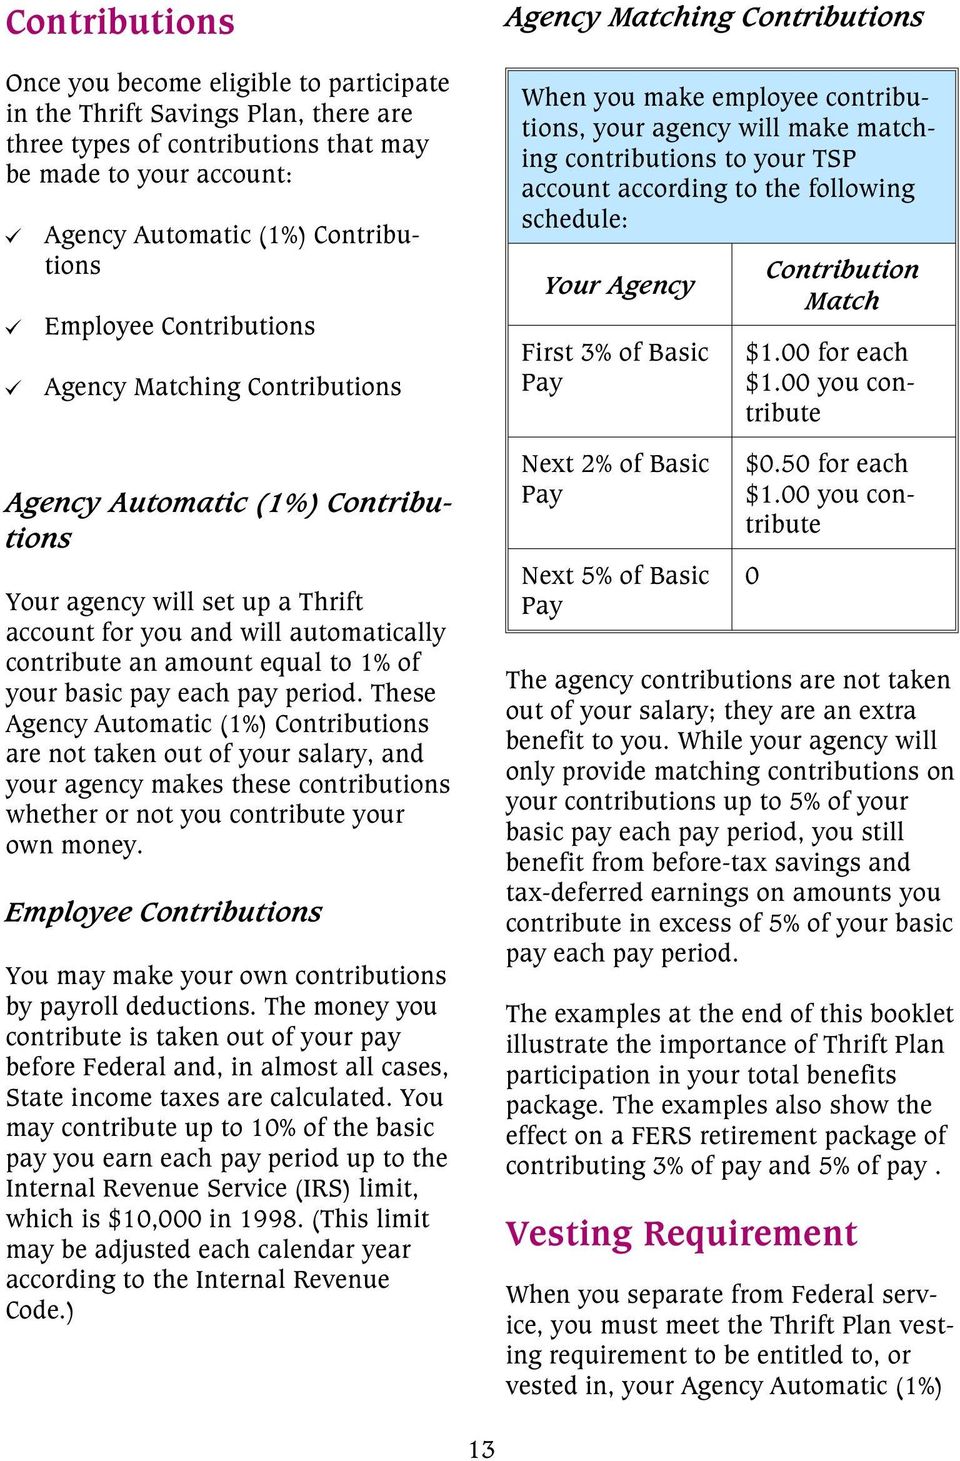 your basic pay each pay period. These Agency Automatic (1%) Contributions are not taken out of your salary, and your agency makes these contributions whether or not you contribute your own money.